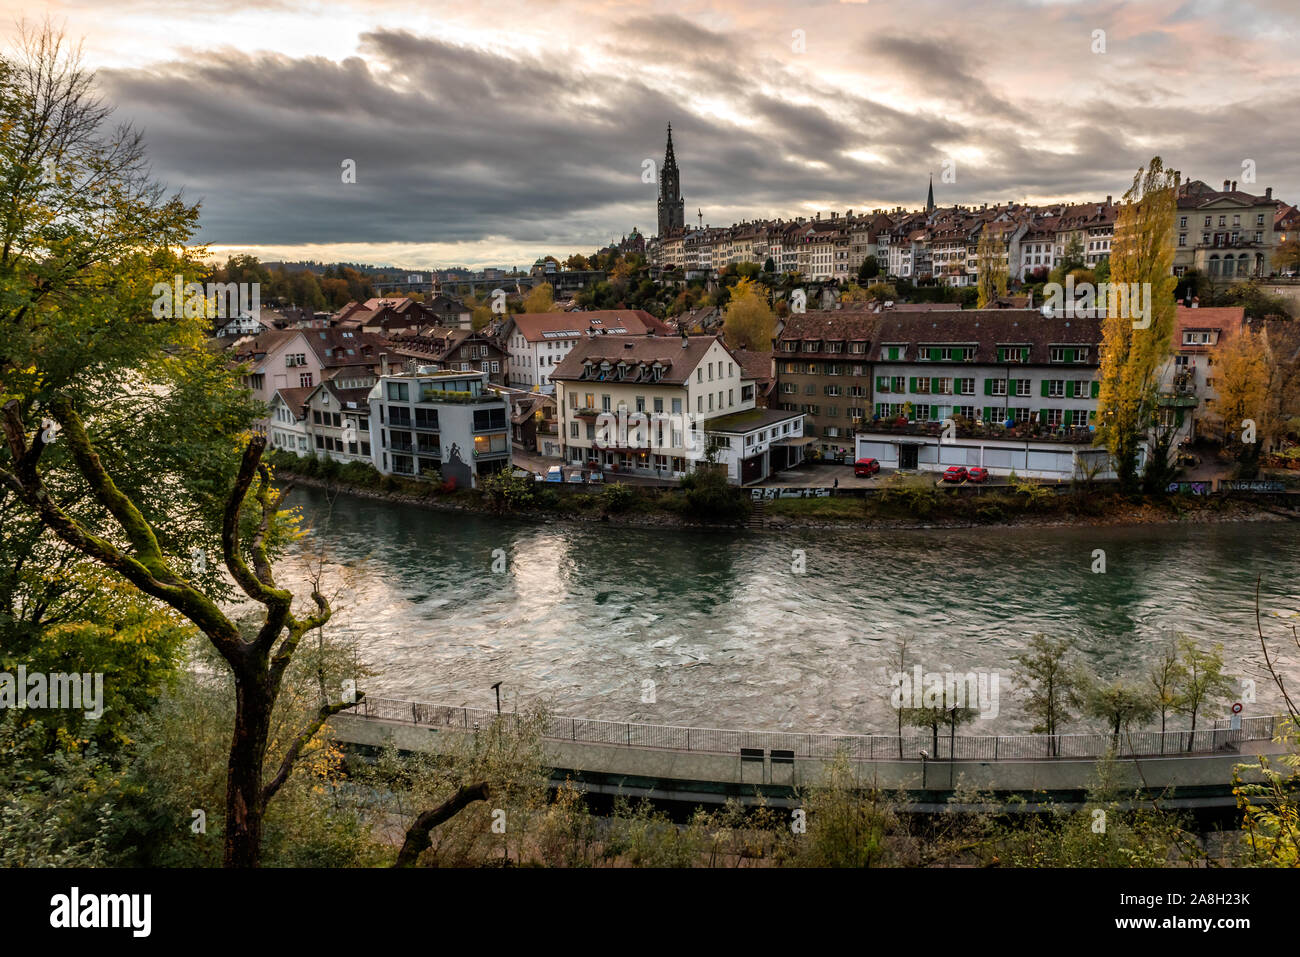 Panoramic view of the Bern old town with the Aare river flowing around the town at sunset in Bern, Switzerland Stock Photo